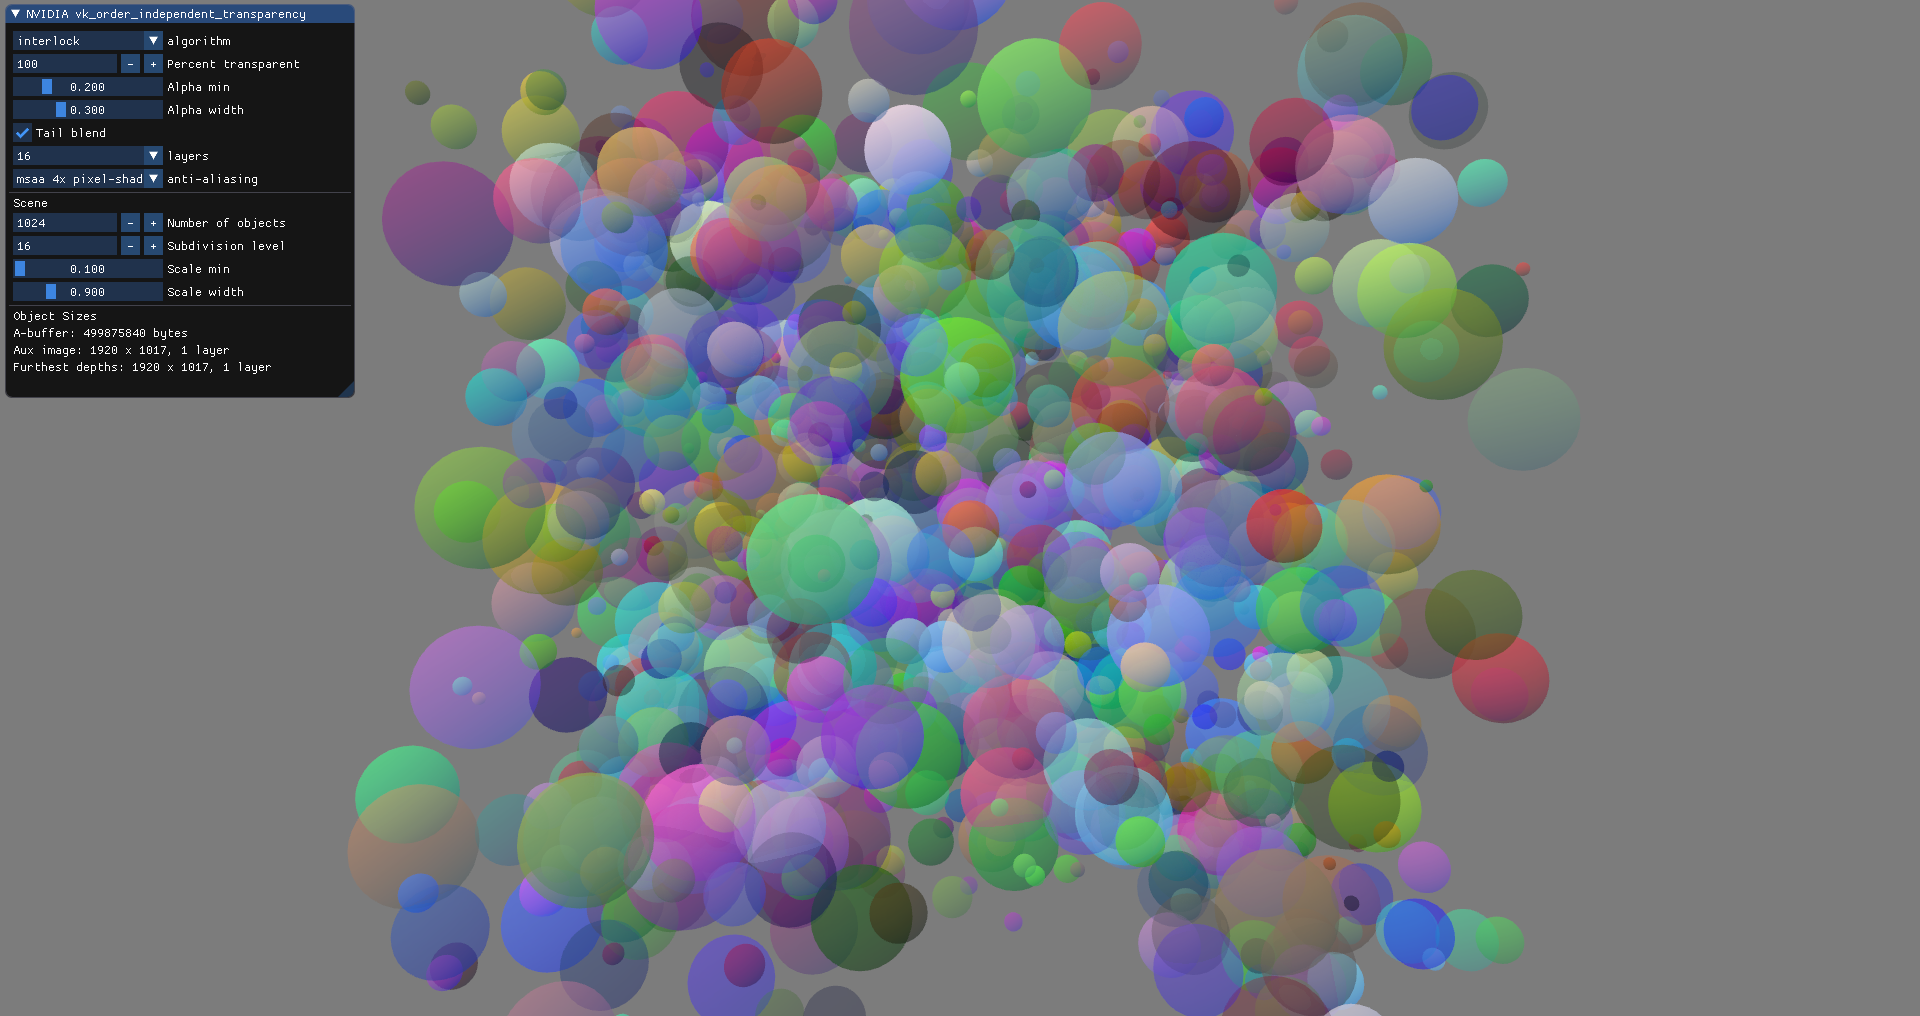 Shows a thousand semitransparent spheres on a gray background with a user interface in the top-left corner.